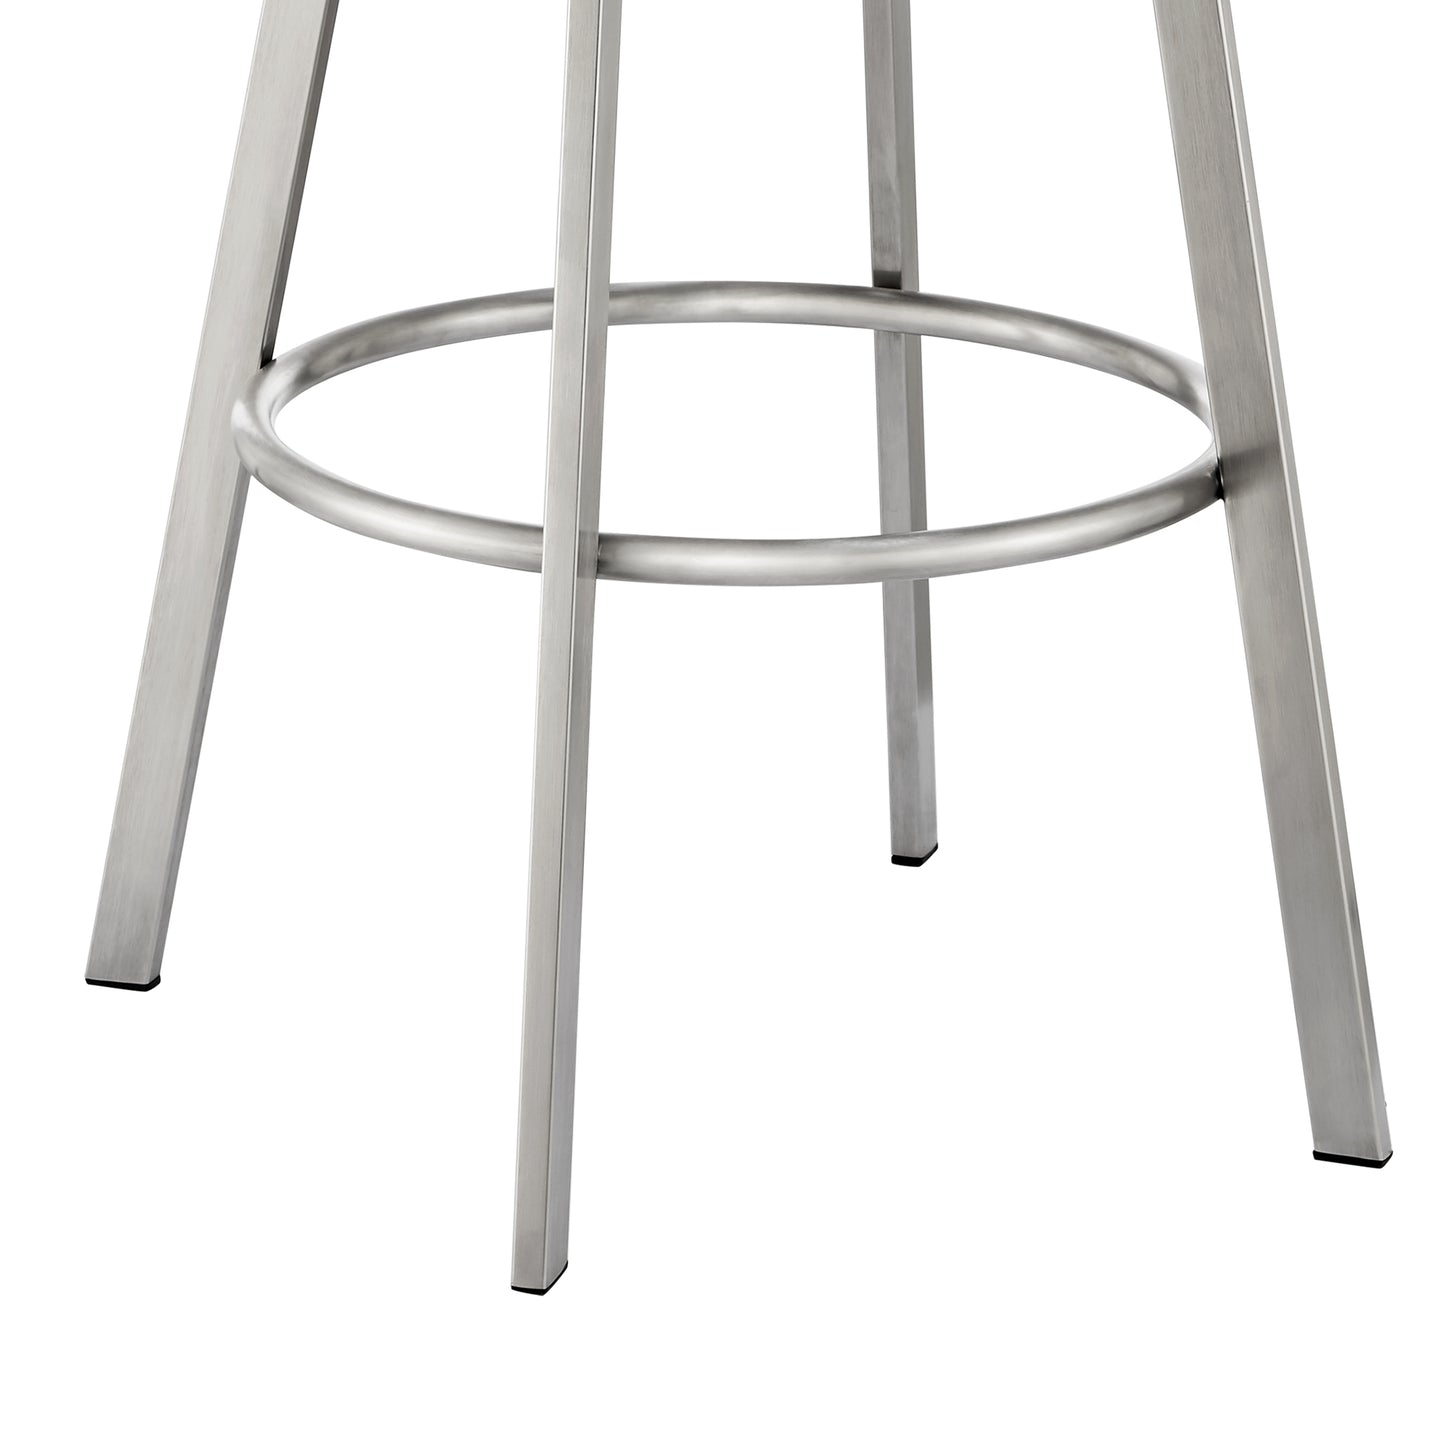 Eleanor 30" Swivel Bar Stool in Brushed Stainless Steel with White Faux Leather